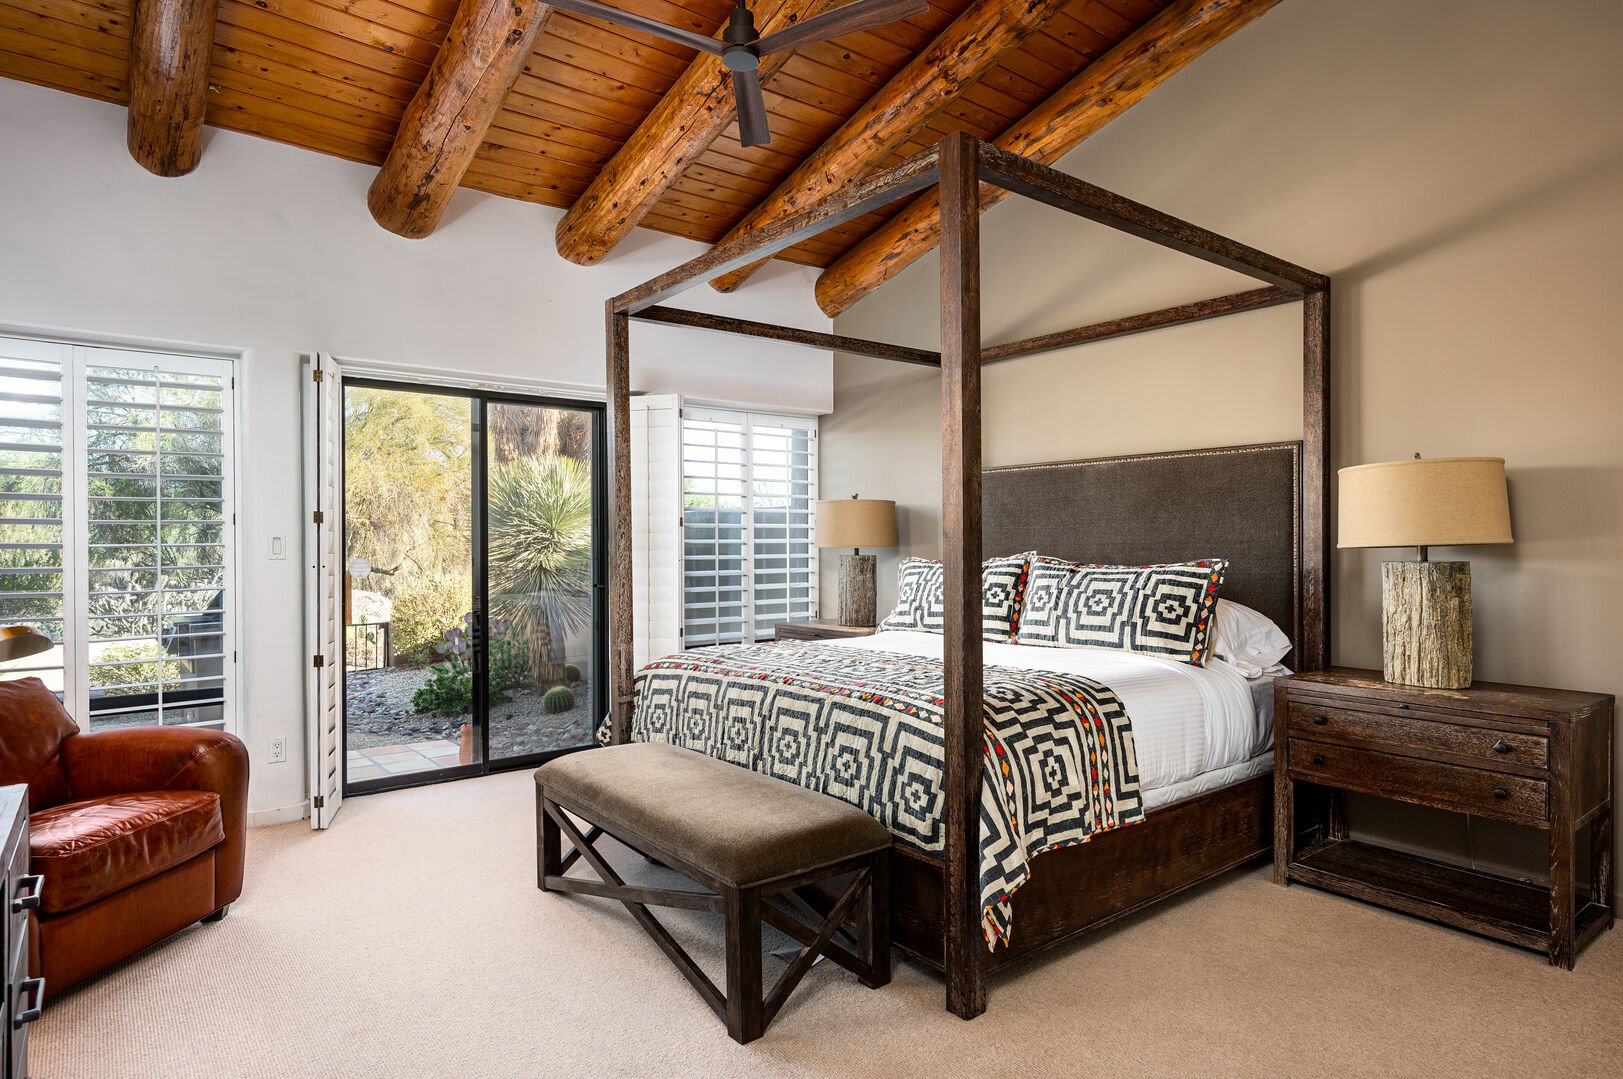 Master bedroom with access to the patio space.